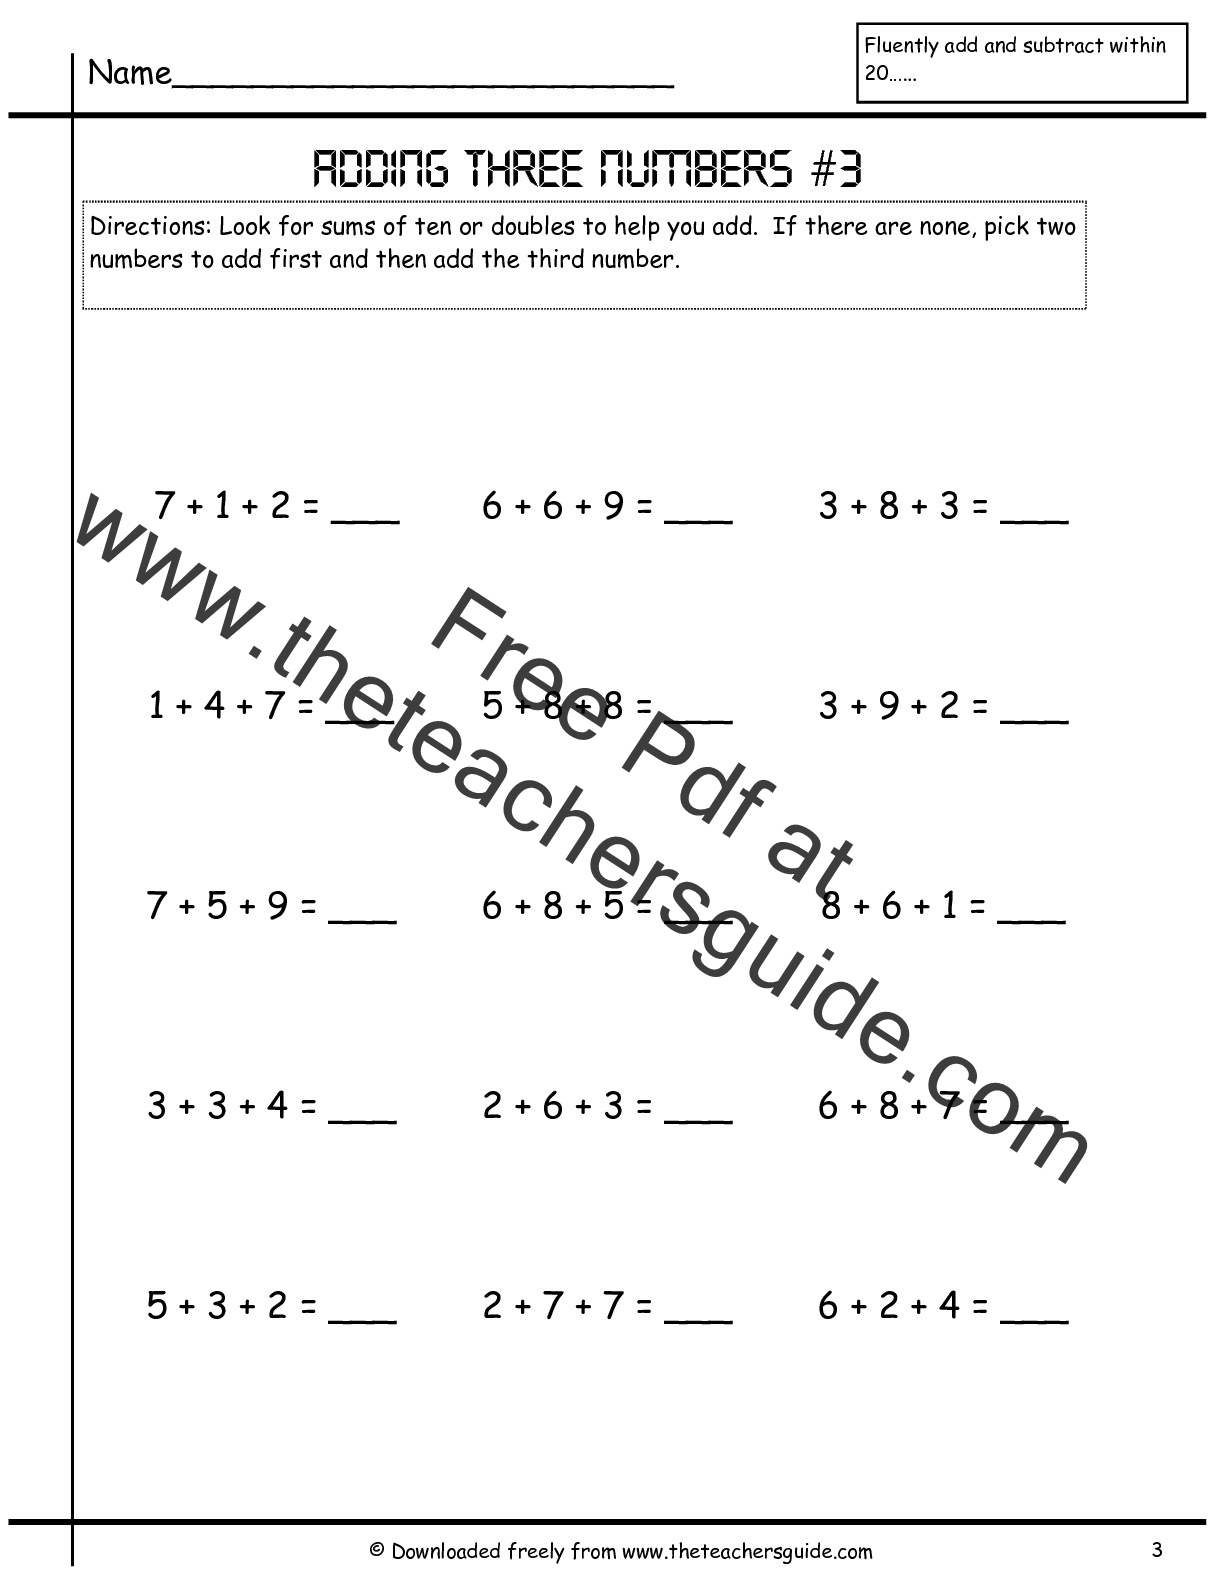 adding-three-single-digit-numbers-worksheets-from-the-teacher-s-guide